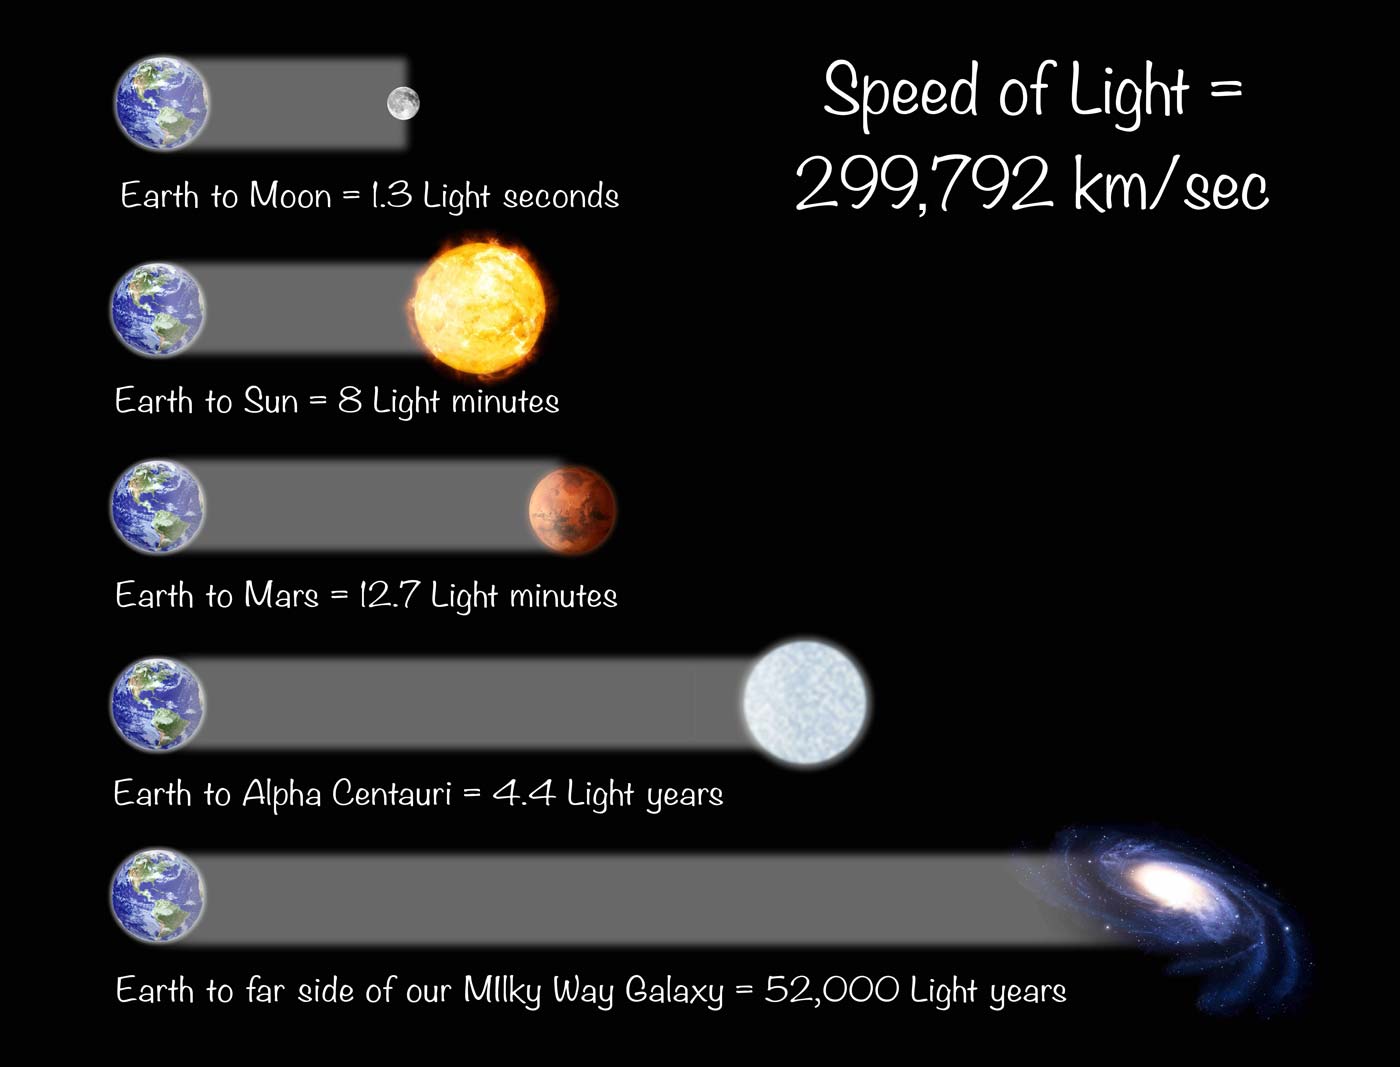 Distances from the earth in light seconds, light minutes and light years